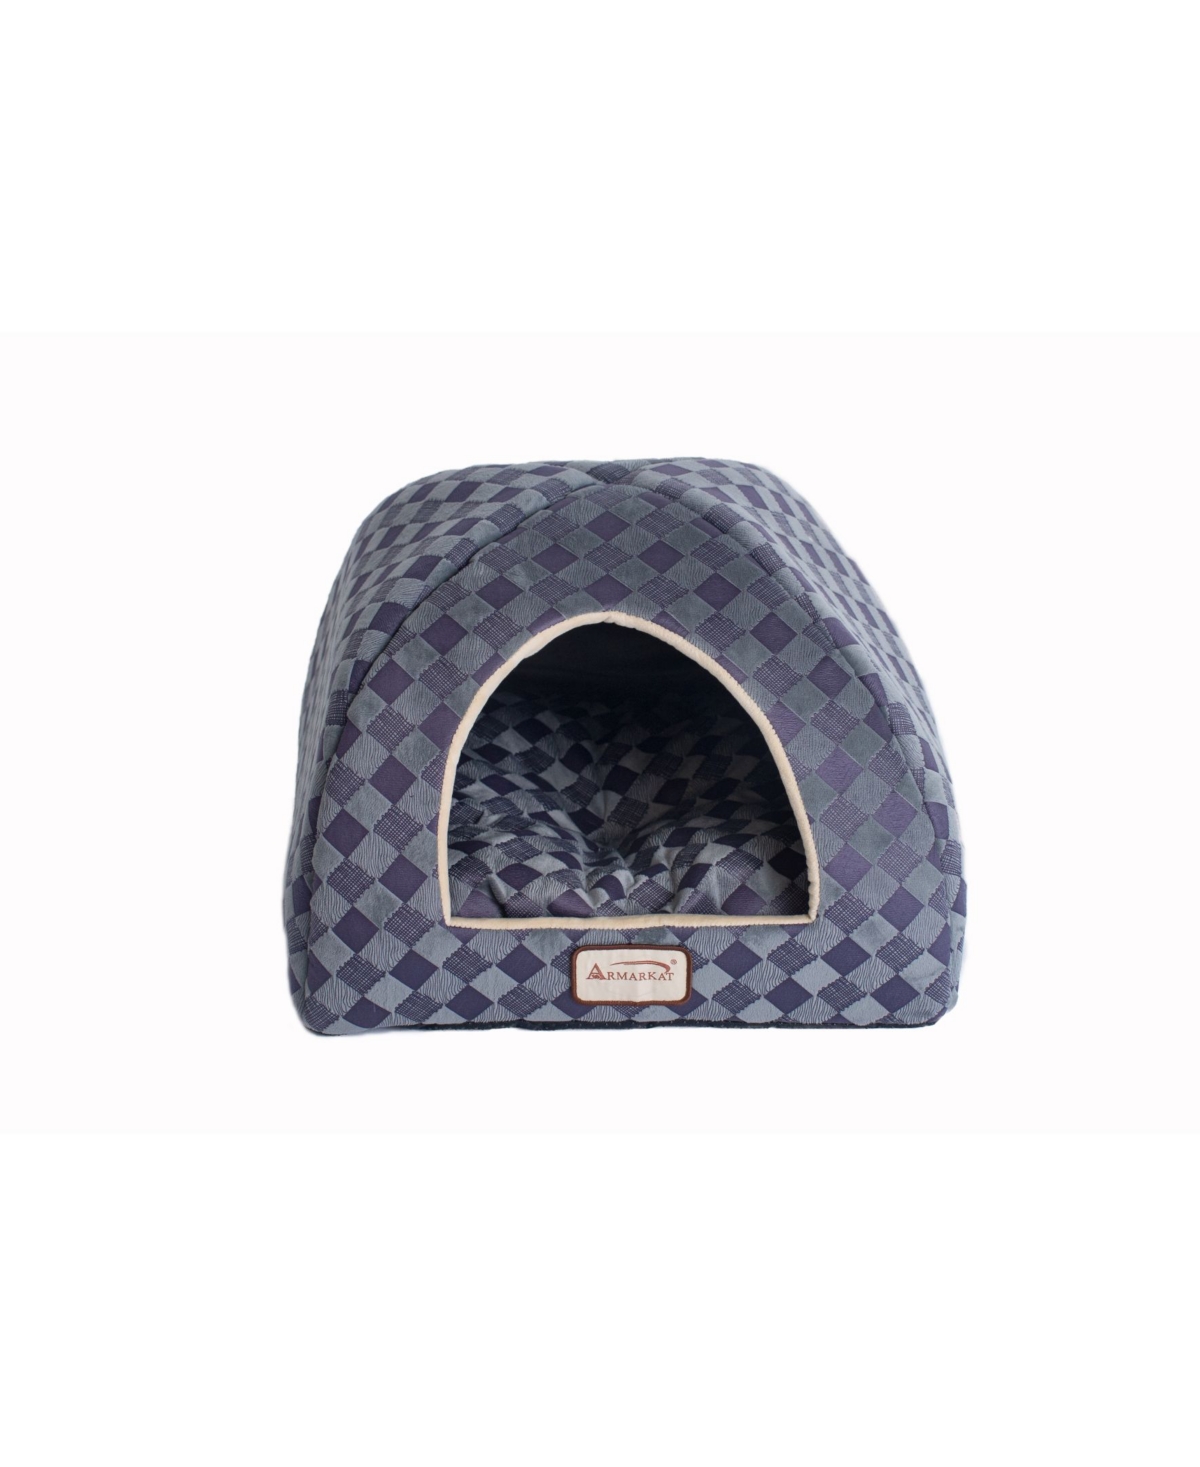 Cave Cat Bed with Checkered Pattern - Purple, Gray